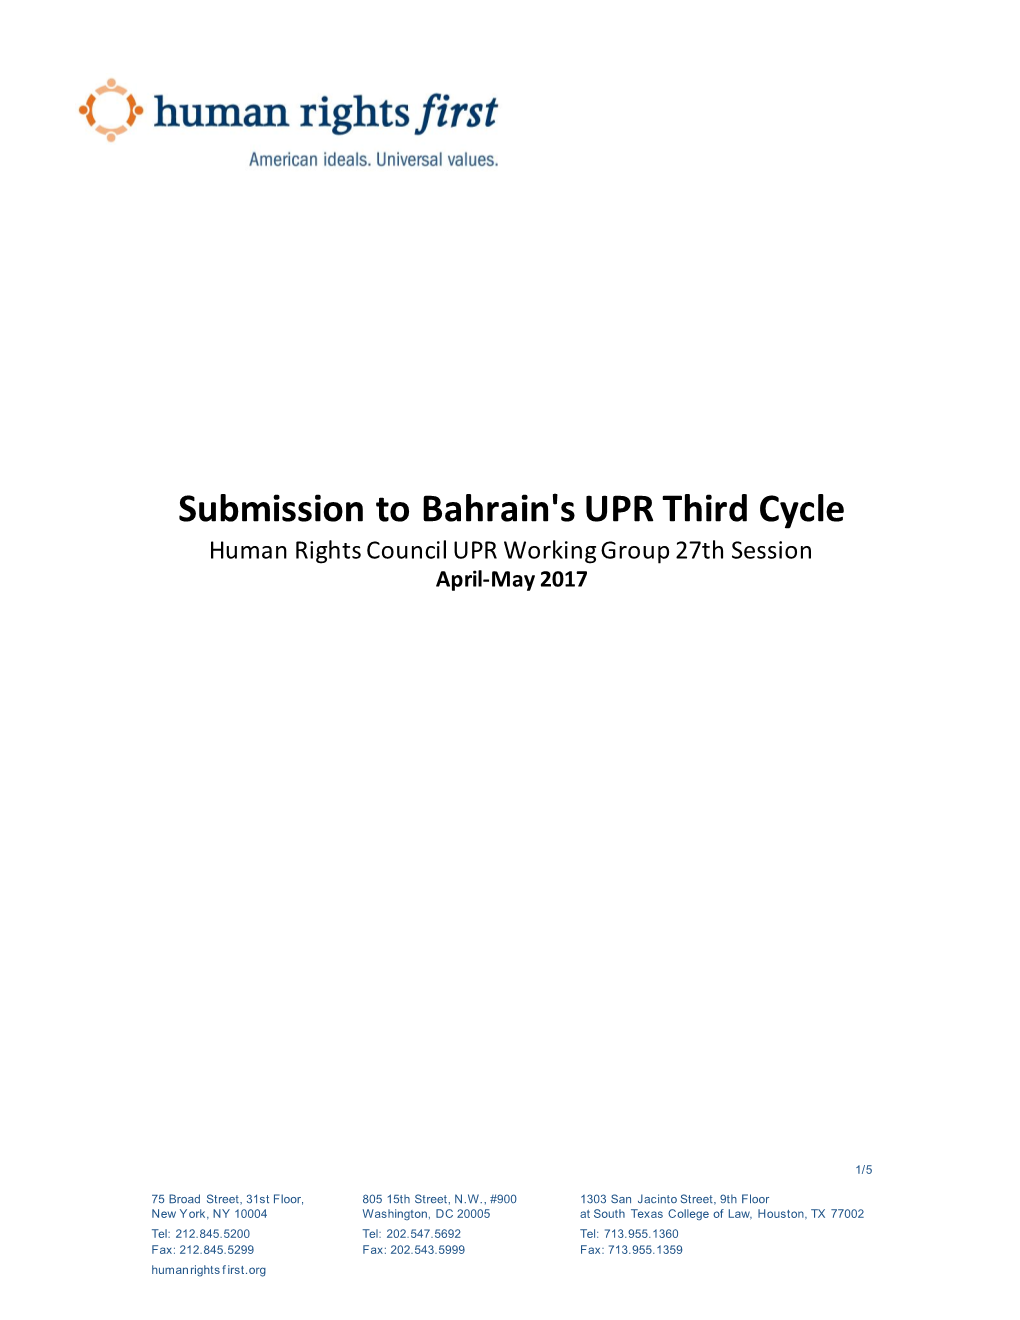 Submission to Bahrain's UPR Third Cycle Human Rights Council UPR Working Group 27Th Session April-May 2017